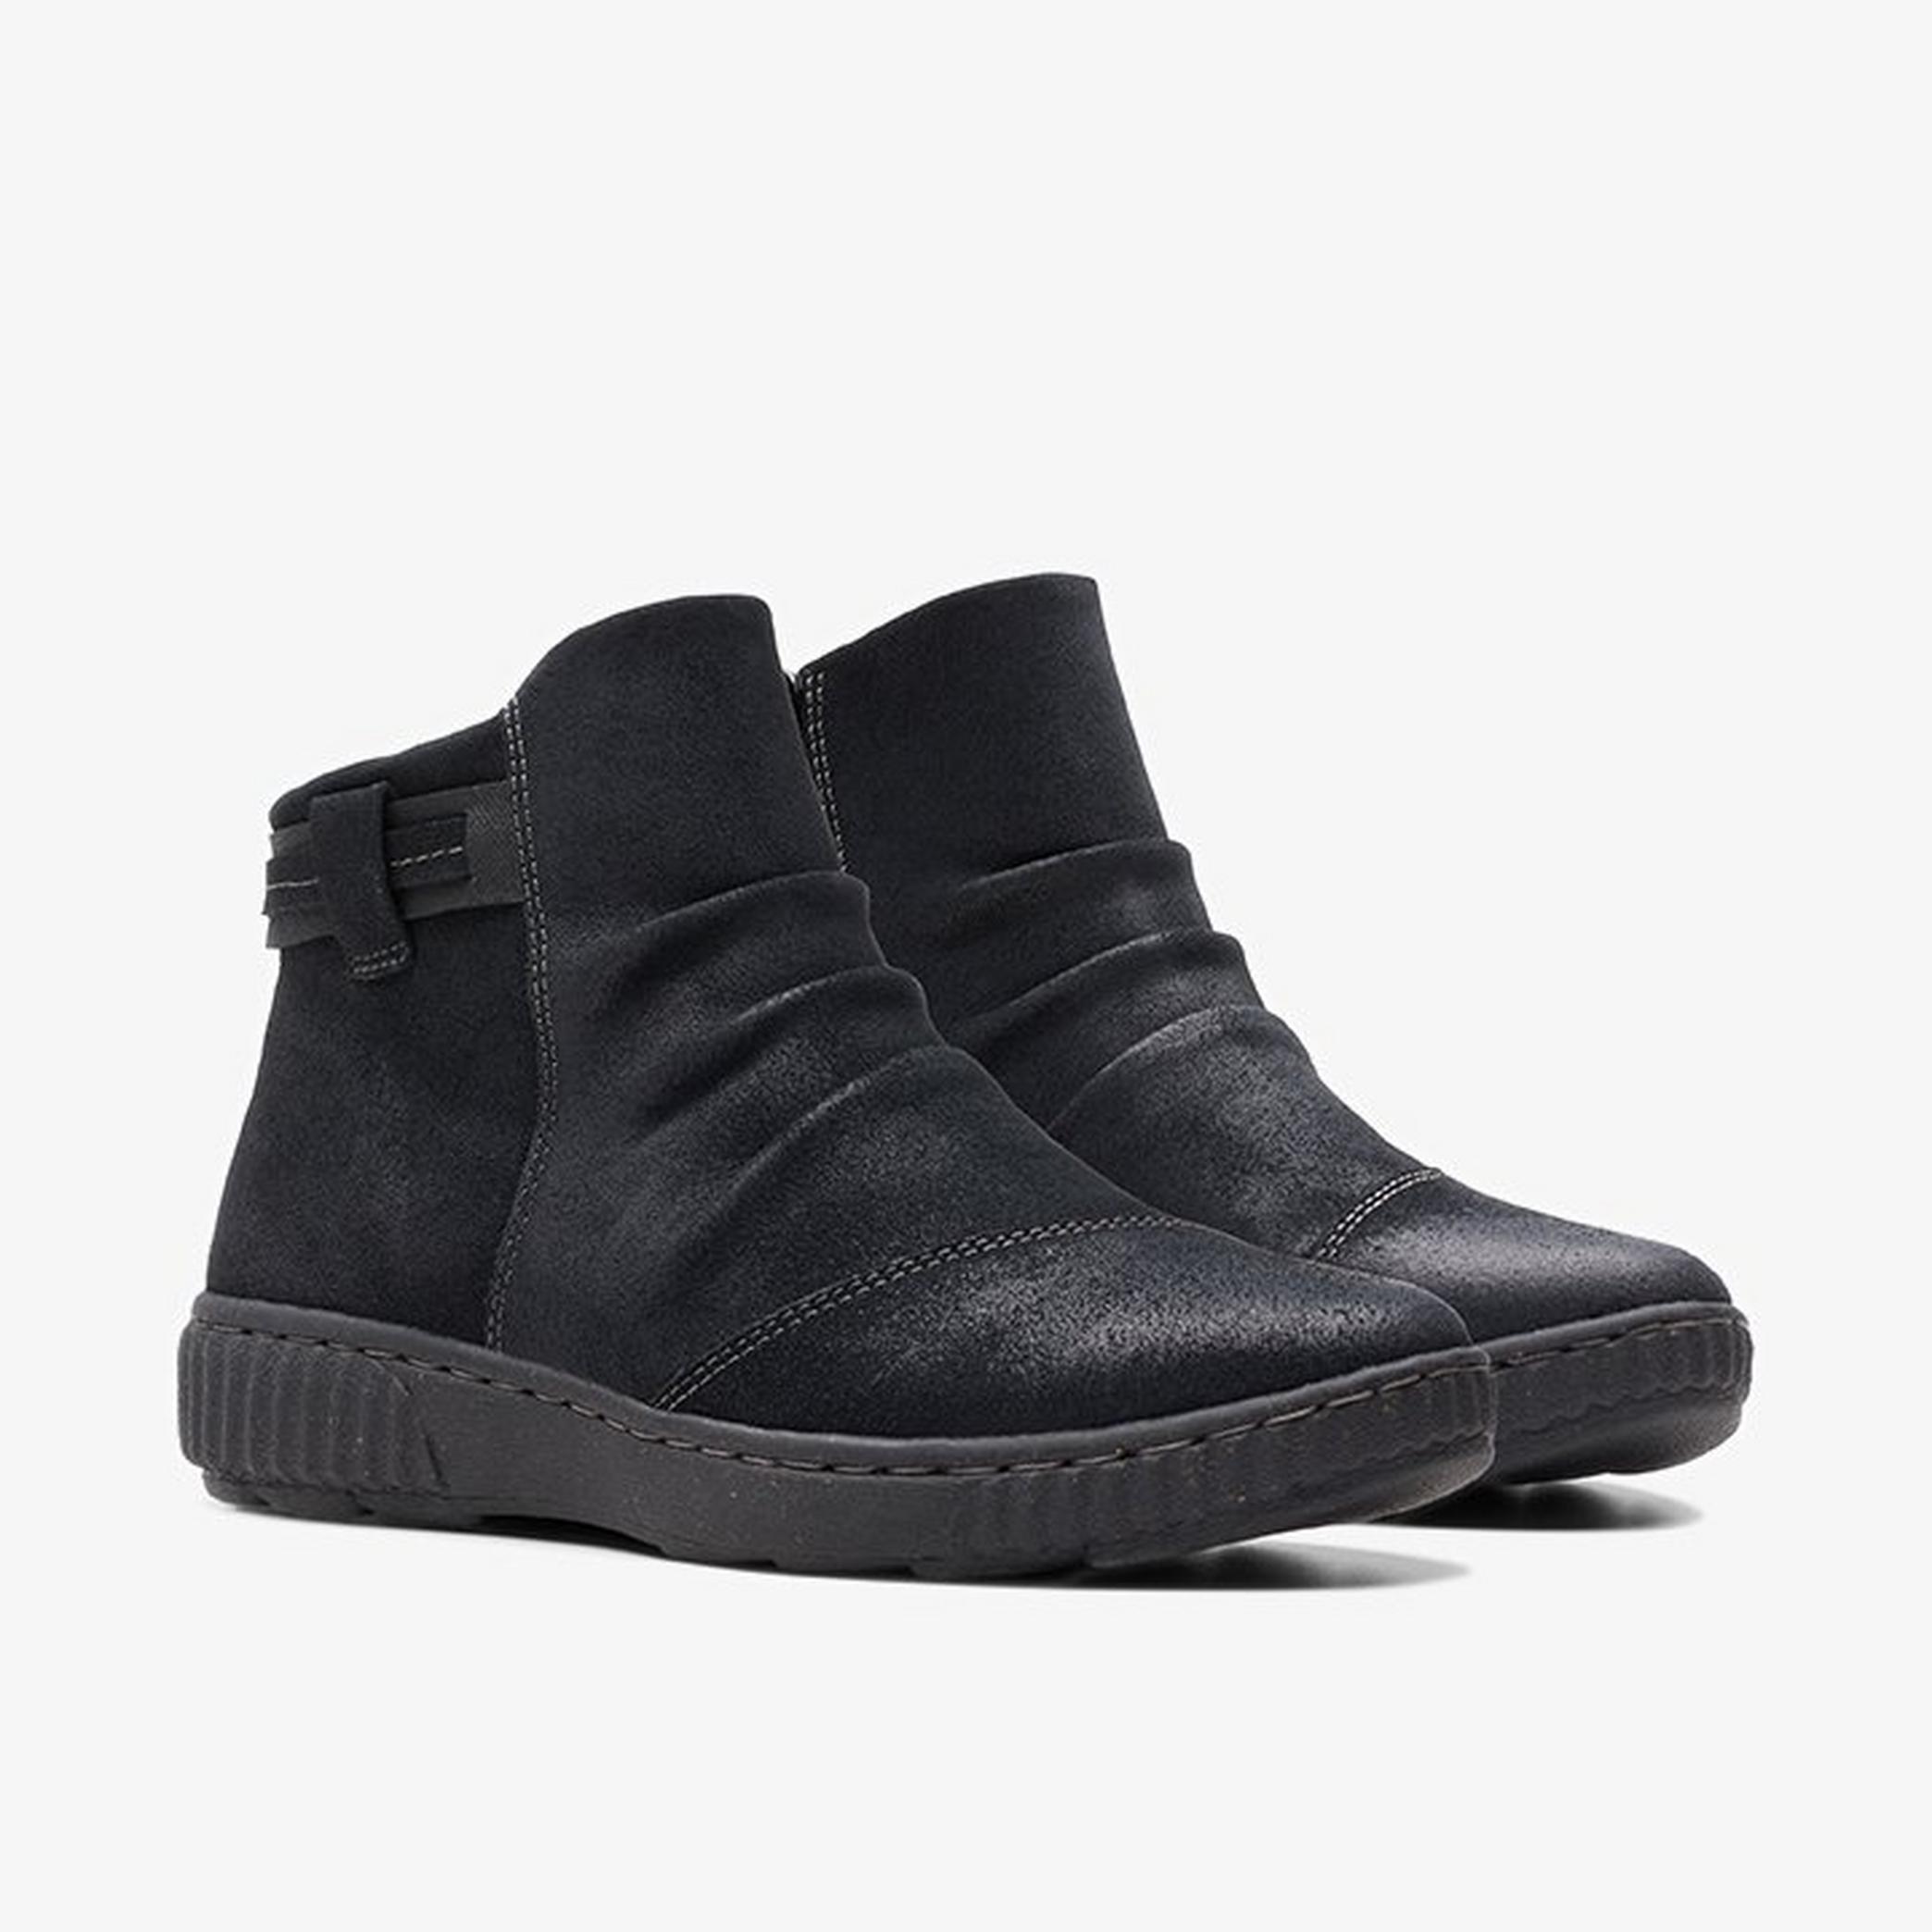 Caroline Derby Black Suede Ankle Boots, view 4 of 6